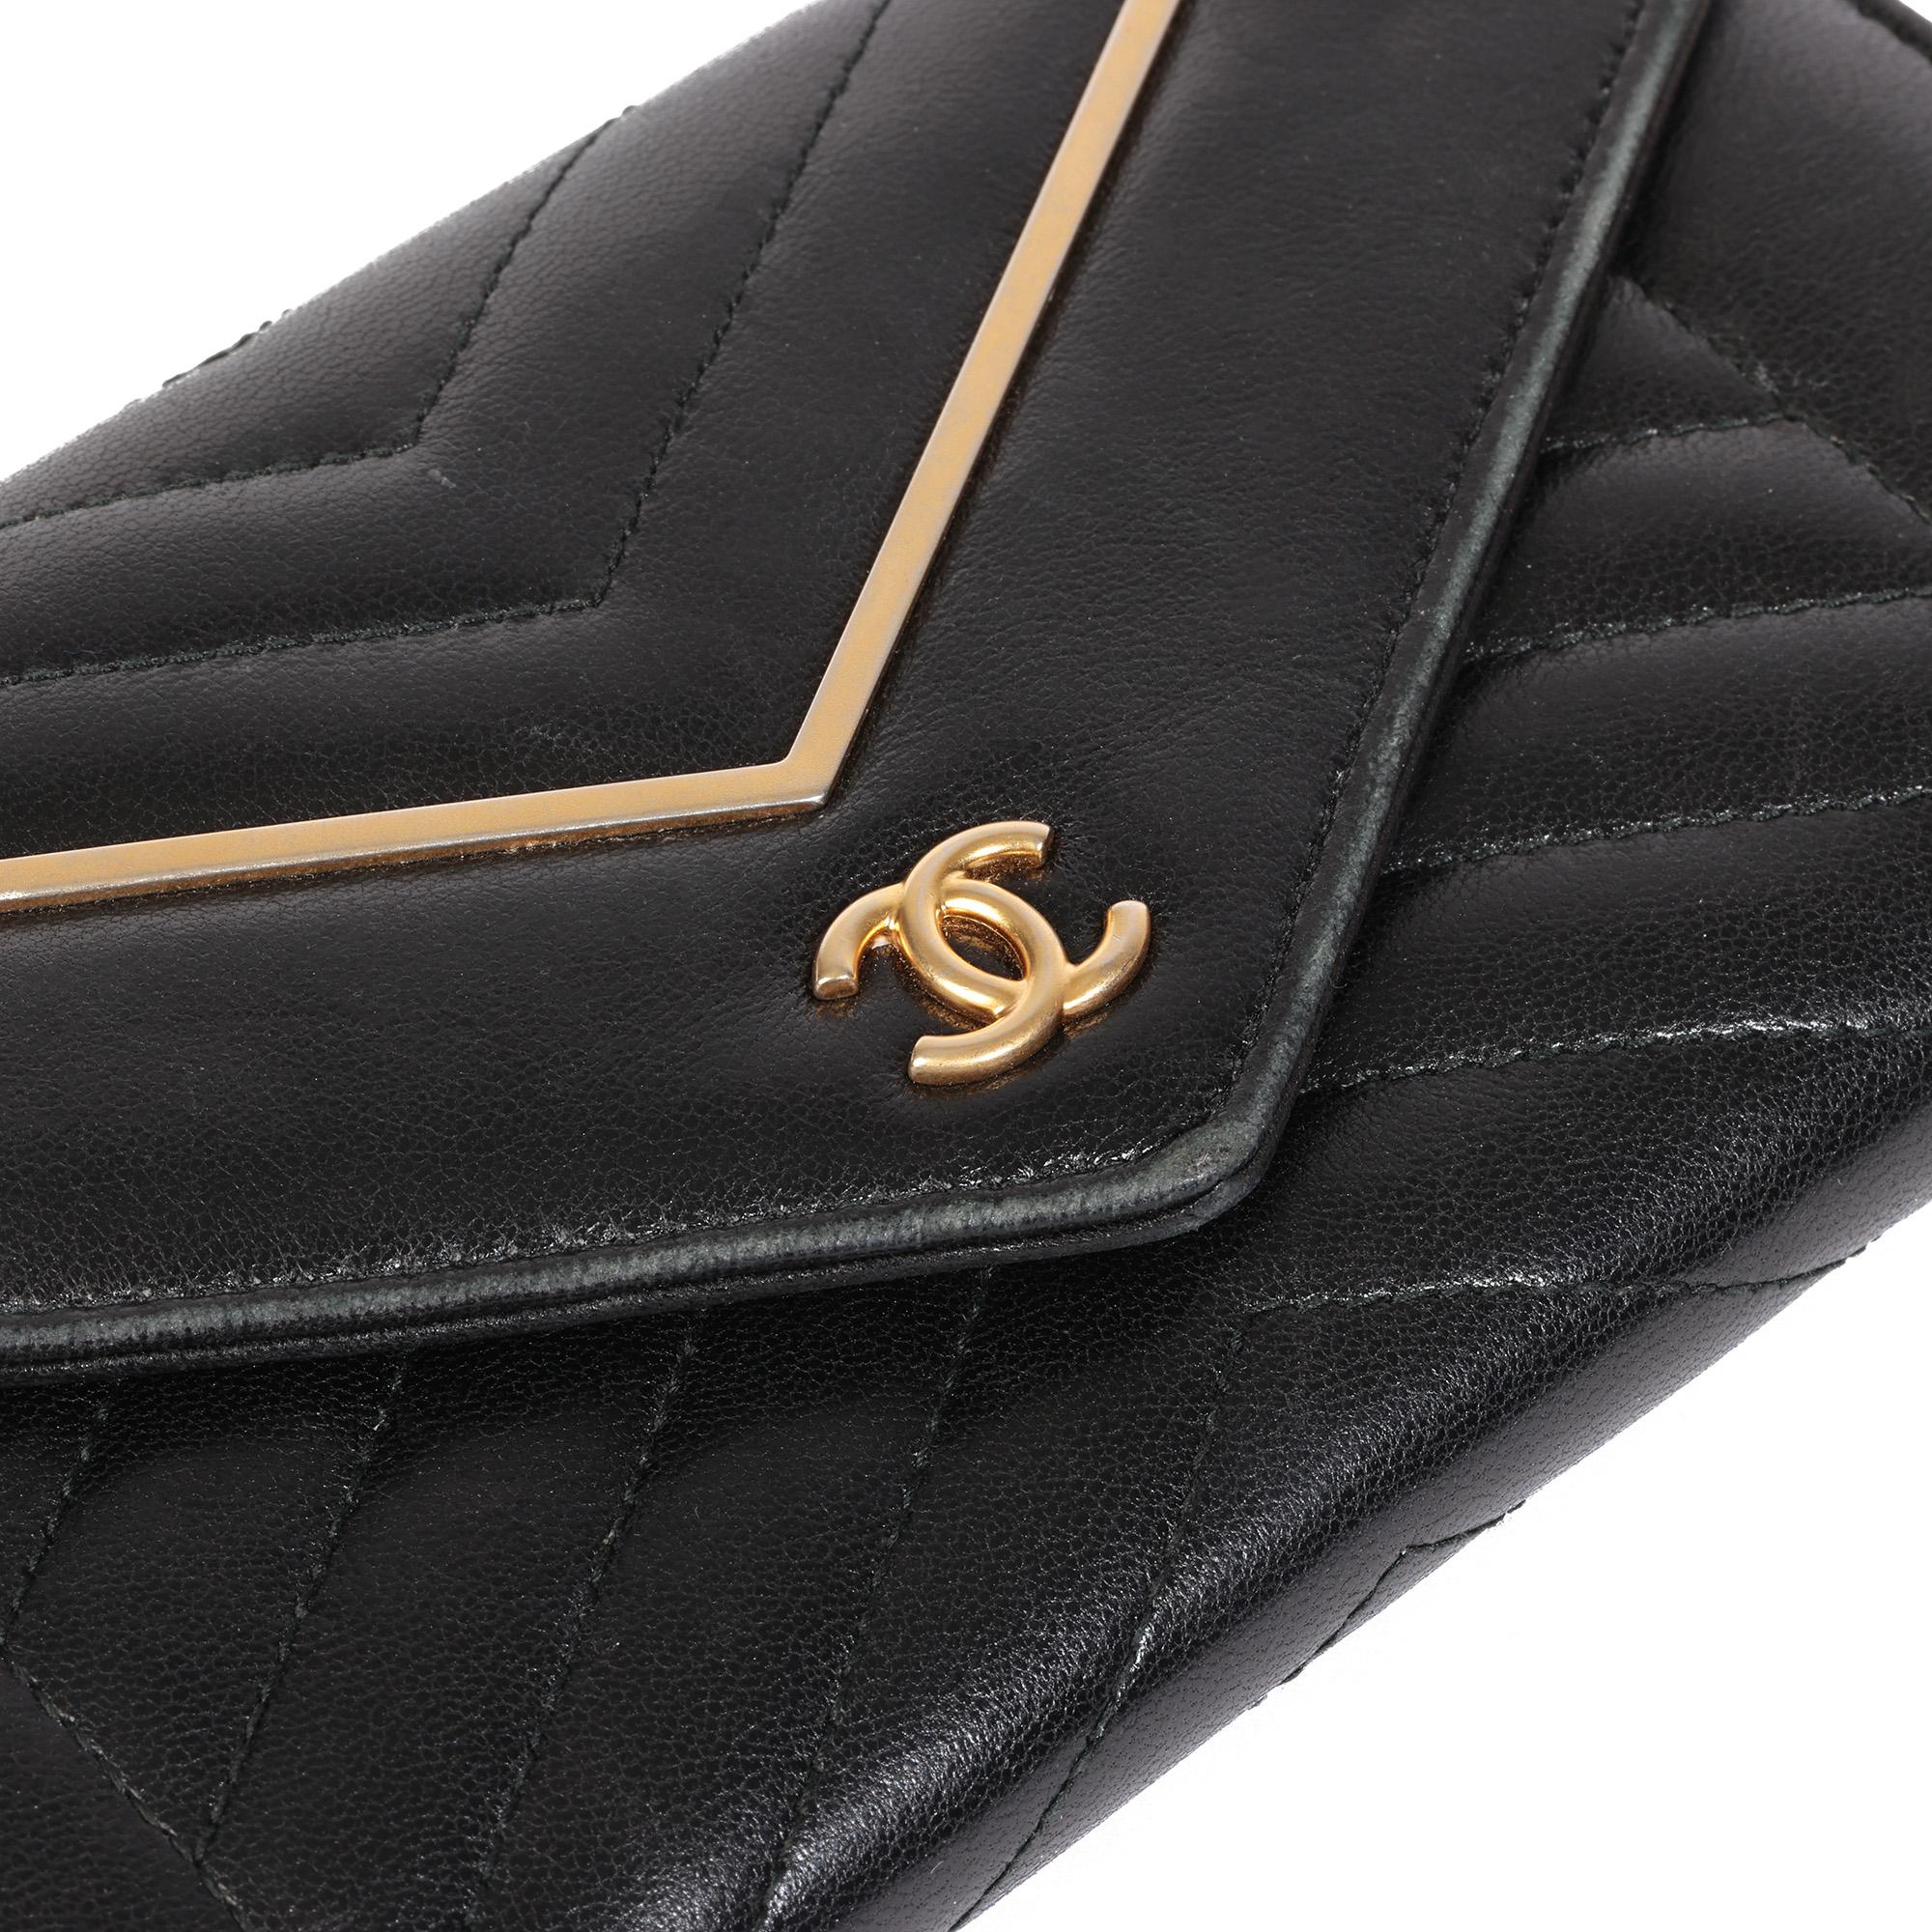 BRAND	Chanel
MODEL	Reversed Wallet
AGE	2017
GENDER	Women's
MATERIAL(S)	Lambskin Leather
COLOUR	Black
HARDWARE	Gold
INTERIOR	Black Leather
HEIGHT	12cm
WIDTH	20cm
DEPTH	3cm
AUTHENTICITY DETAILS	(Made in Italy)